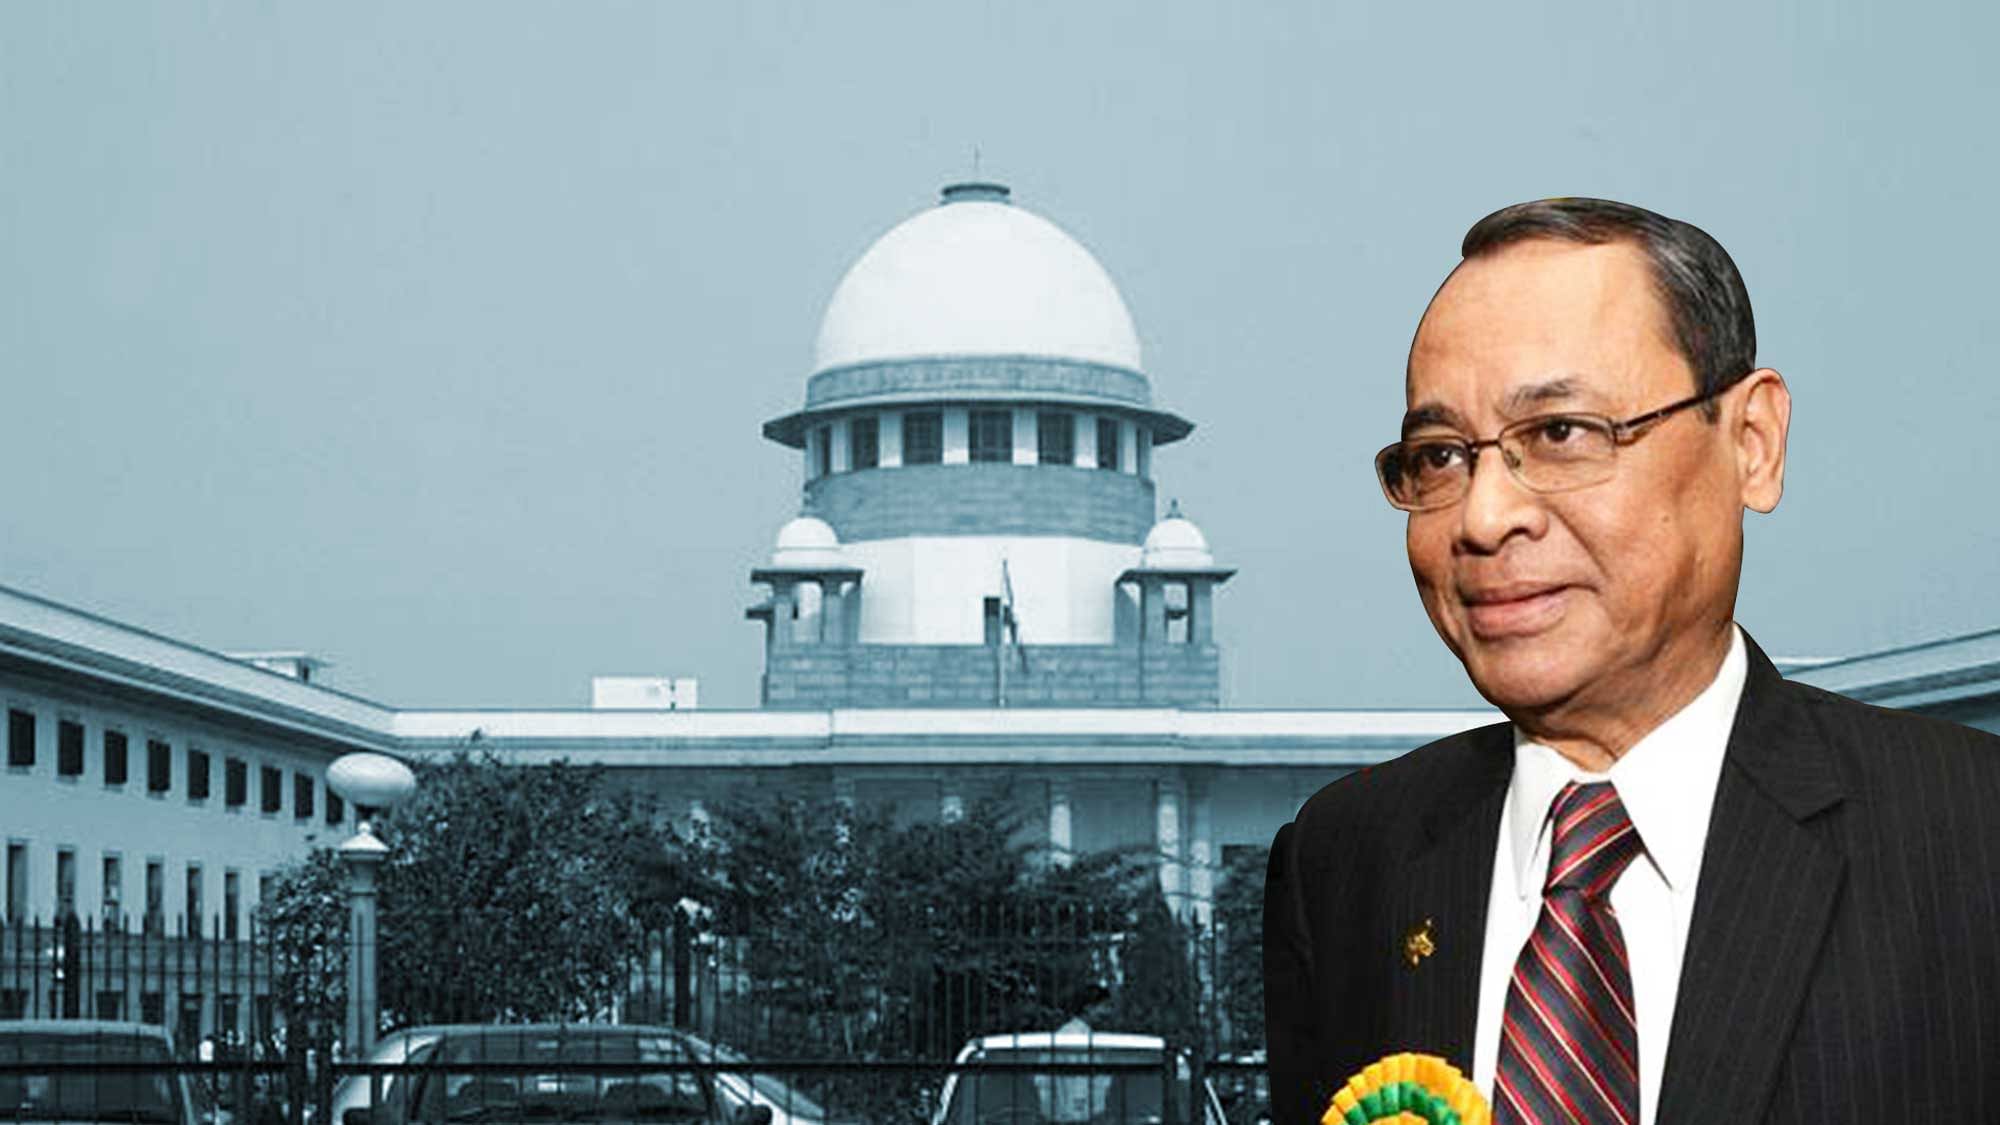 Women in Criminal Law Association issues a statement on sexual harassment allegations on CJI Ranjan Gogoi.